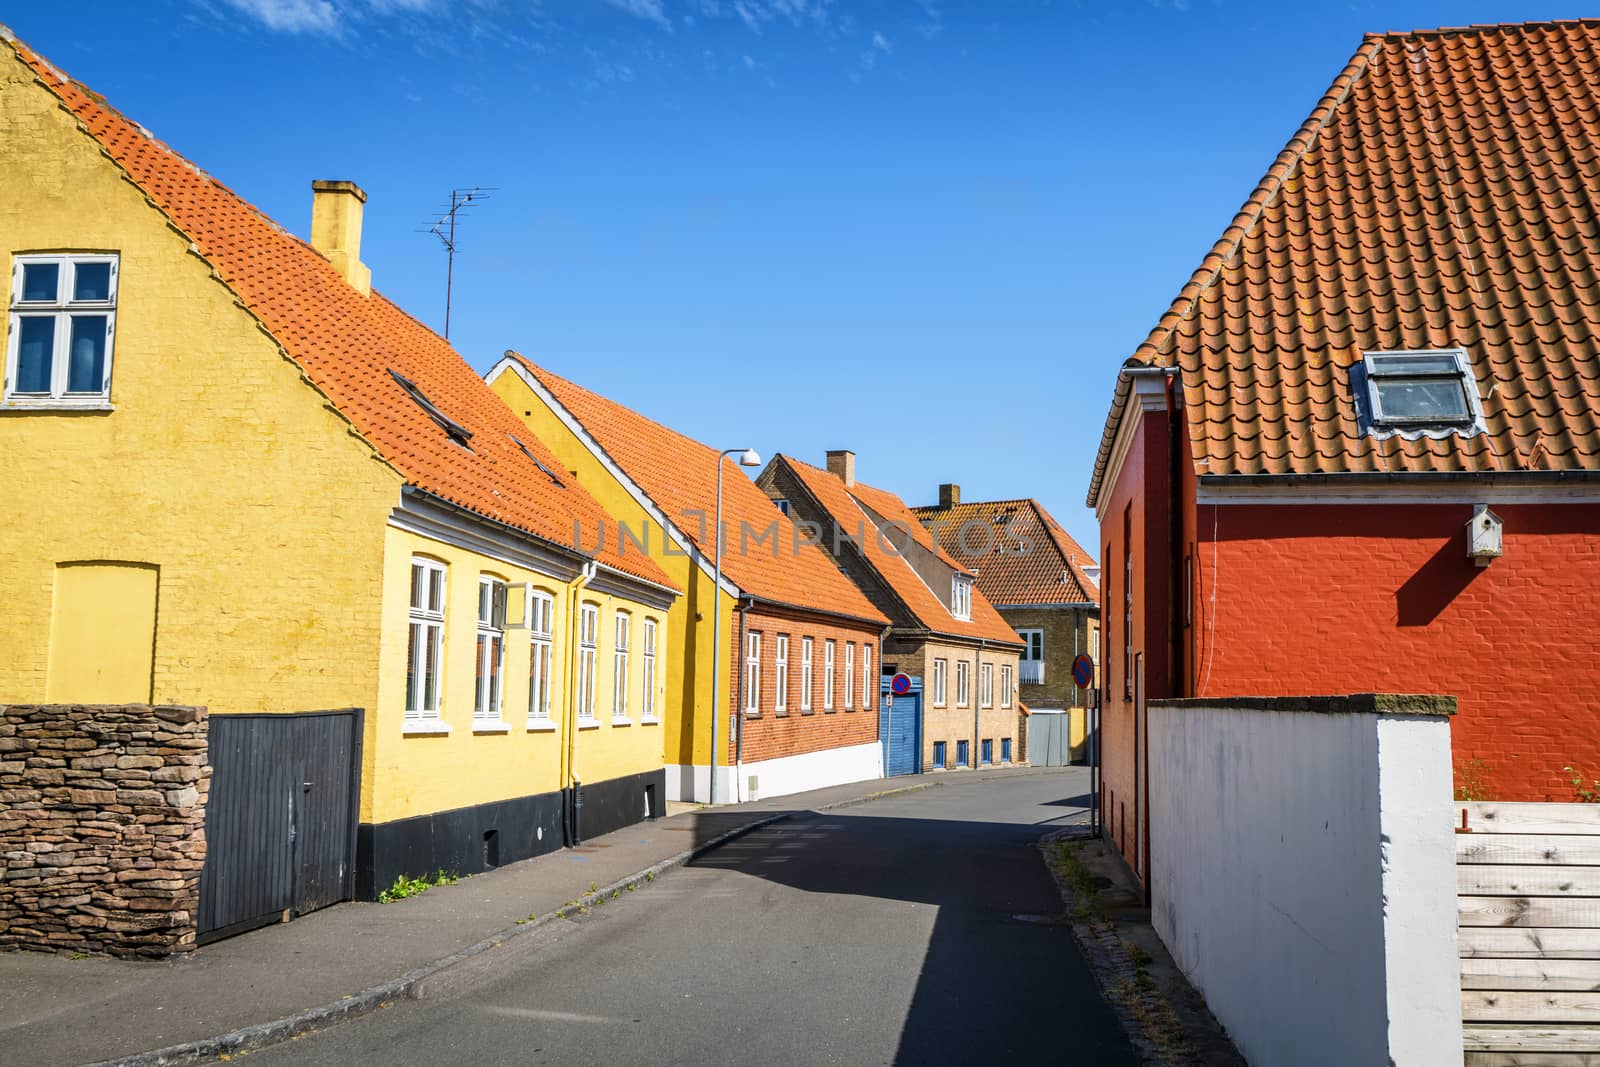 Danish city streets with colorful buildings by Sportactive